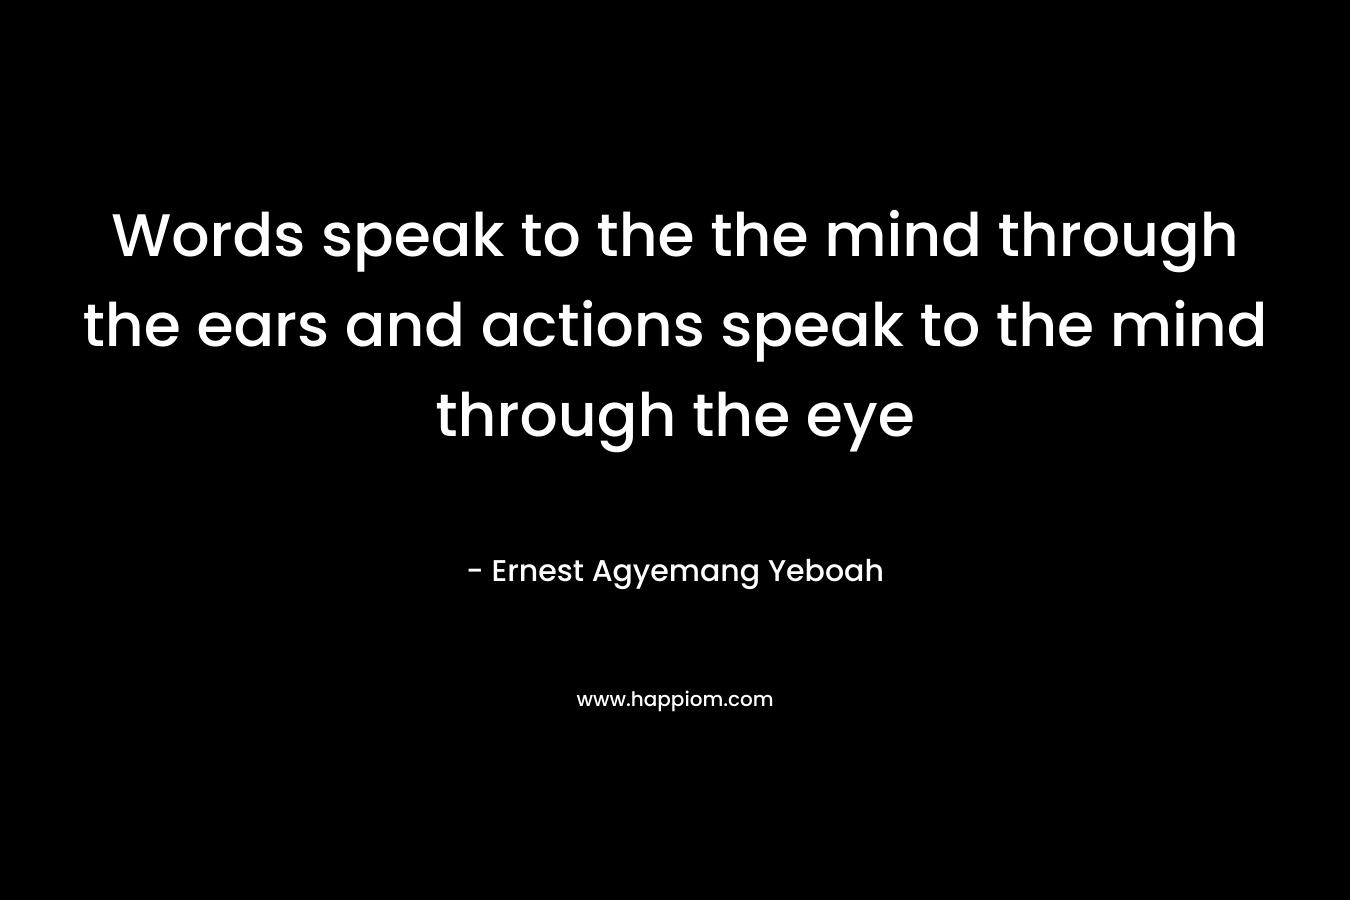 Words speak to the the mind through the ears and actions speak to the mind through the eye